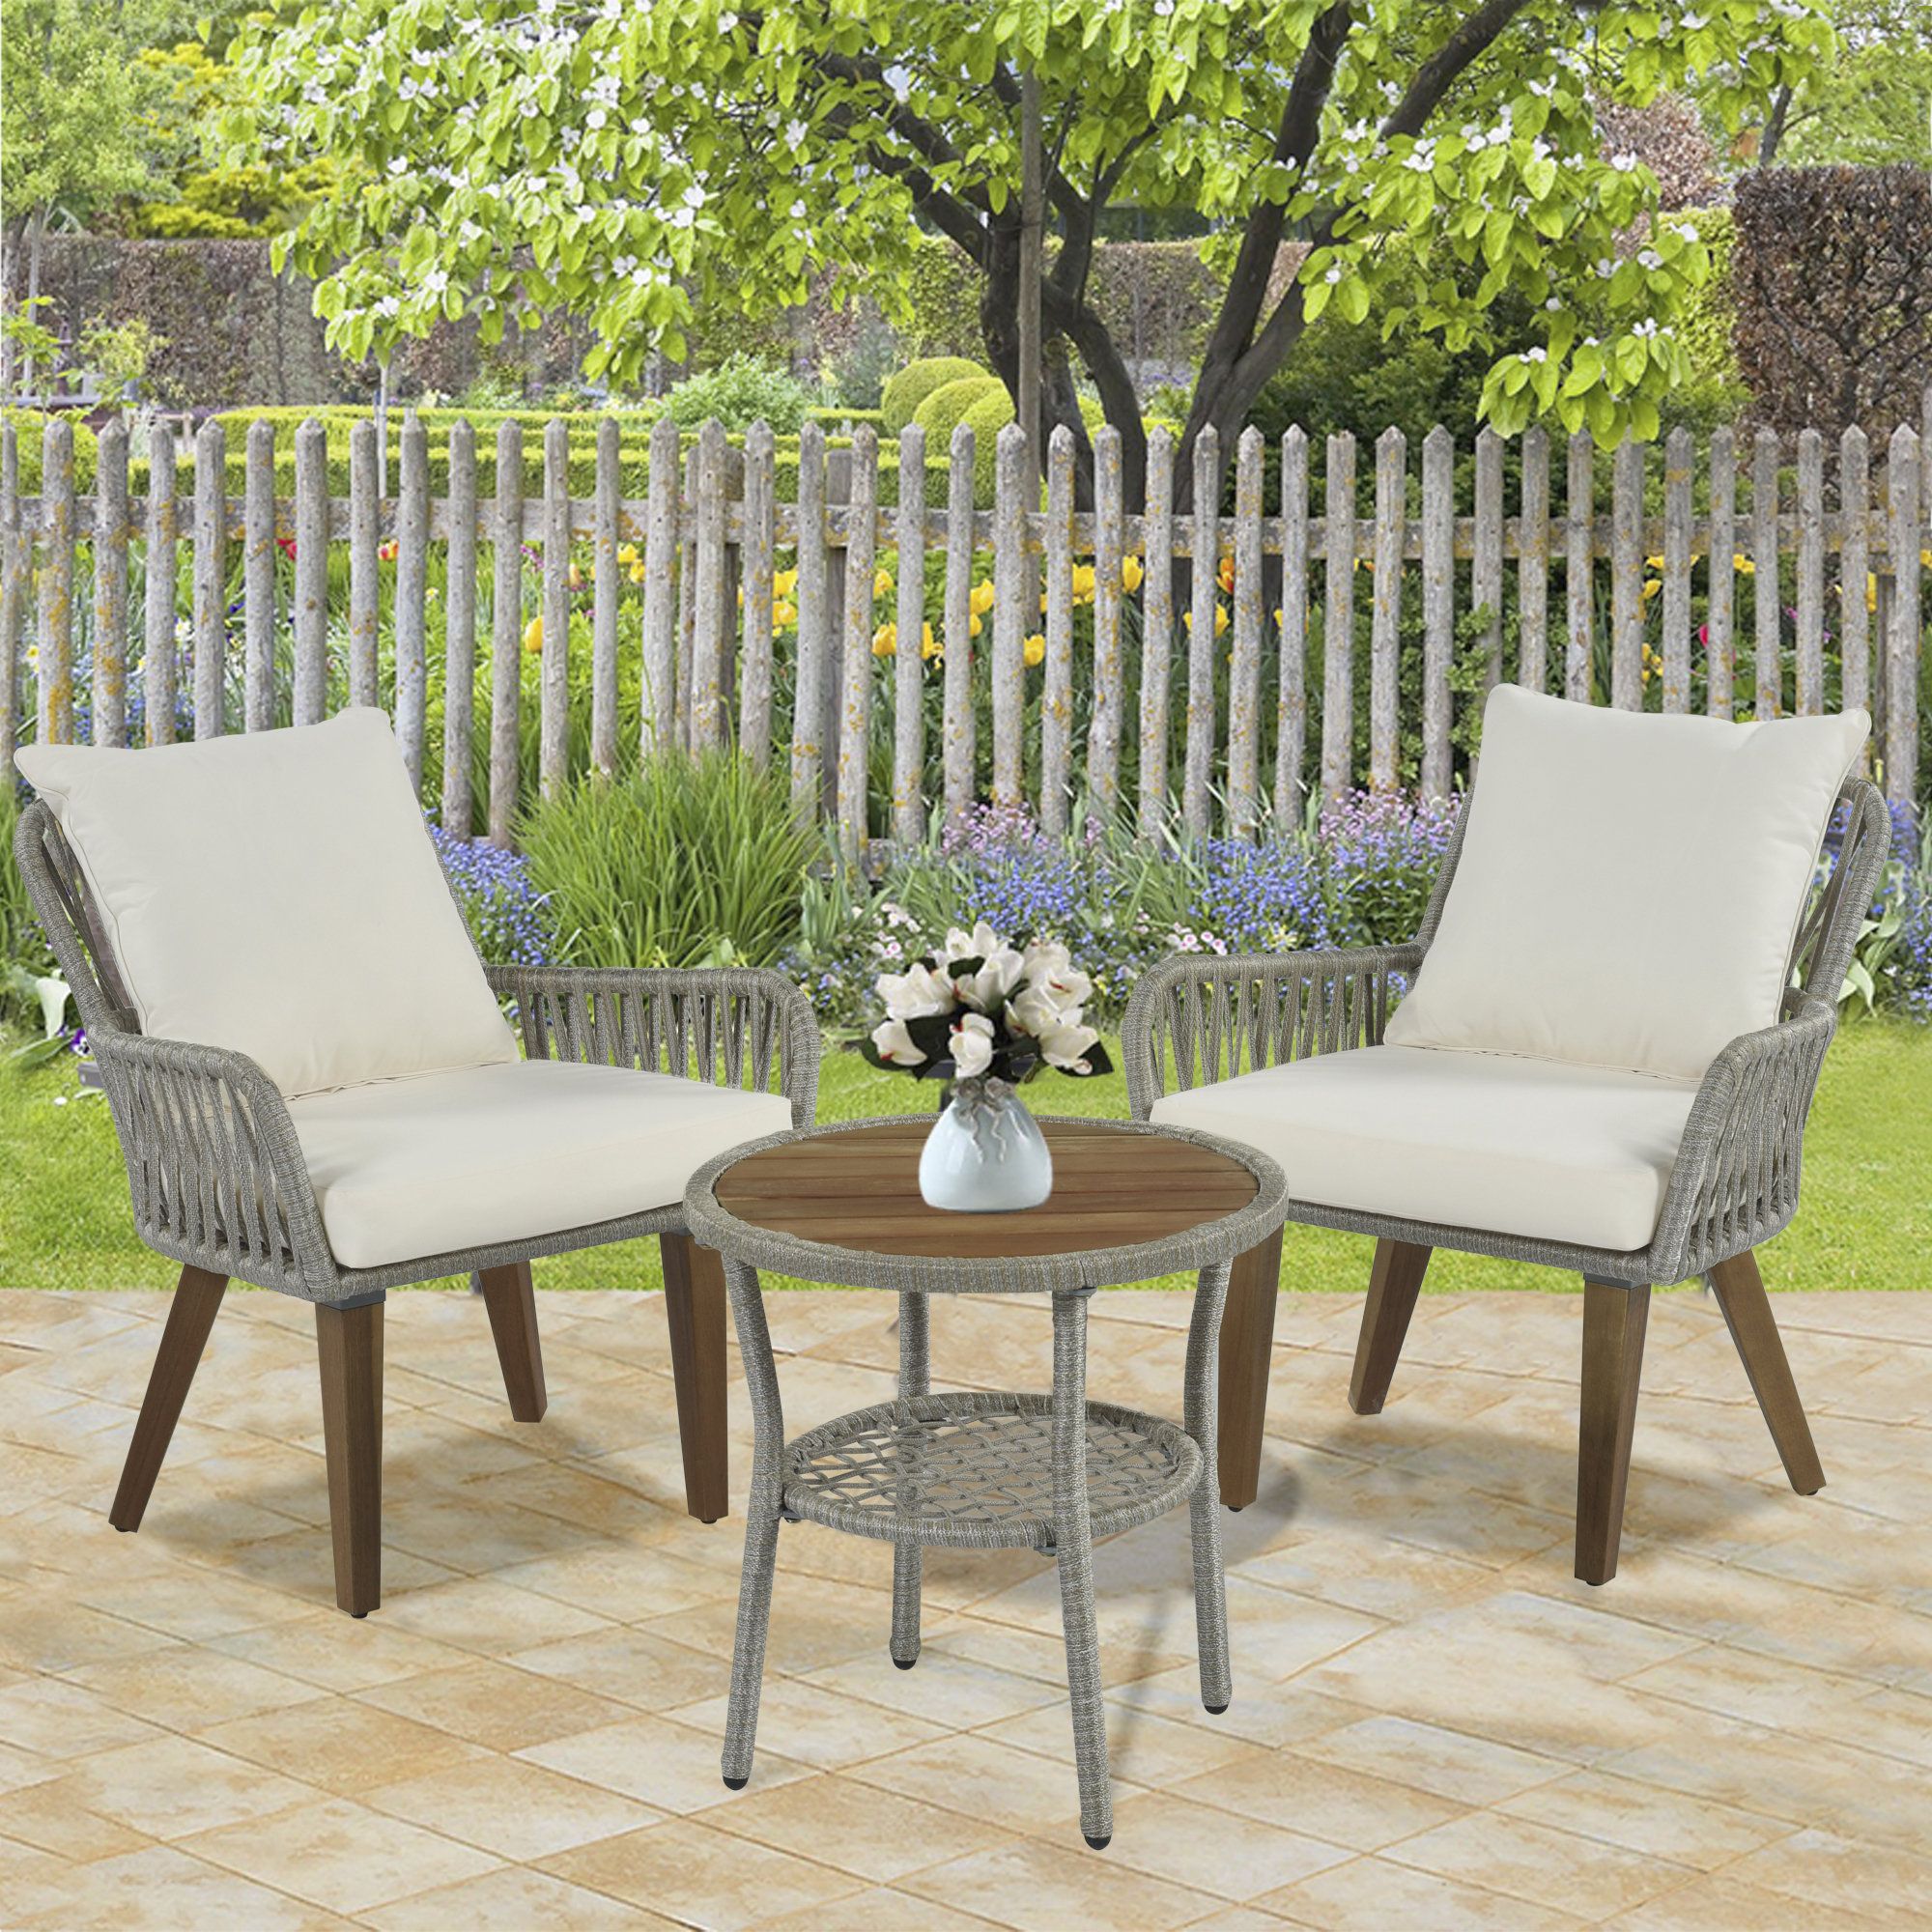 Corrigan Studio® Patio 3 Piece Bistro Set Woven Rope Conversation Set With  Wood Tabletop And Cushions For Balcony, Gray Rope+beige | Wayfair Intended For Woven Rope Outdoor 3 Piece Conversation Set (View 12 of 15)